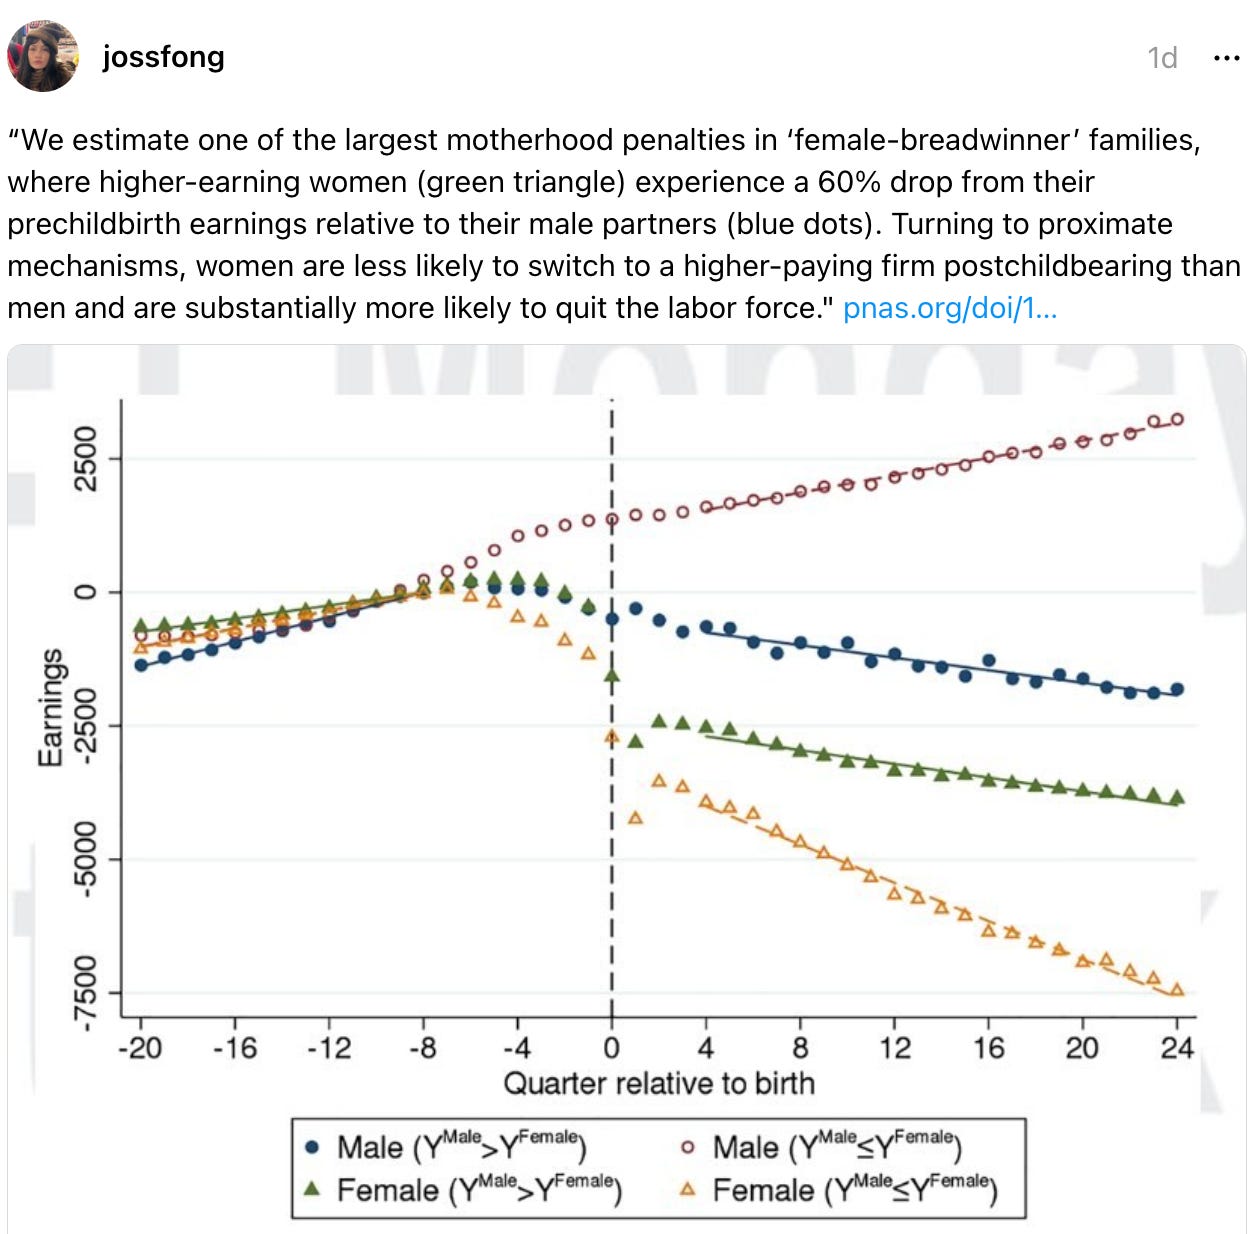 jossfong 1d “We estimate one of the largest motherhood penalties in ‘female-breadwinner’ families, where higher-earning women (green triangle) experience a 60% drop from their prechildbirth earnings relative to their male partners (blue dots). Turning to proximate mechanisms, women are less likely to switch to a higher-paying firm postchildbearing than men and are substantially more likely to quit the labor force." pnas.org/doi/1…